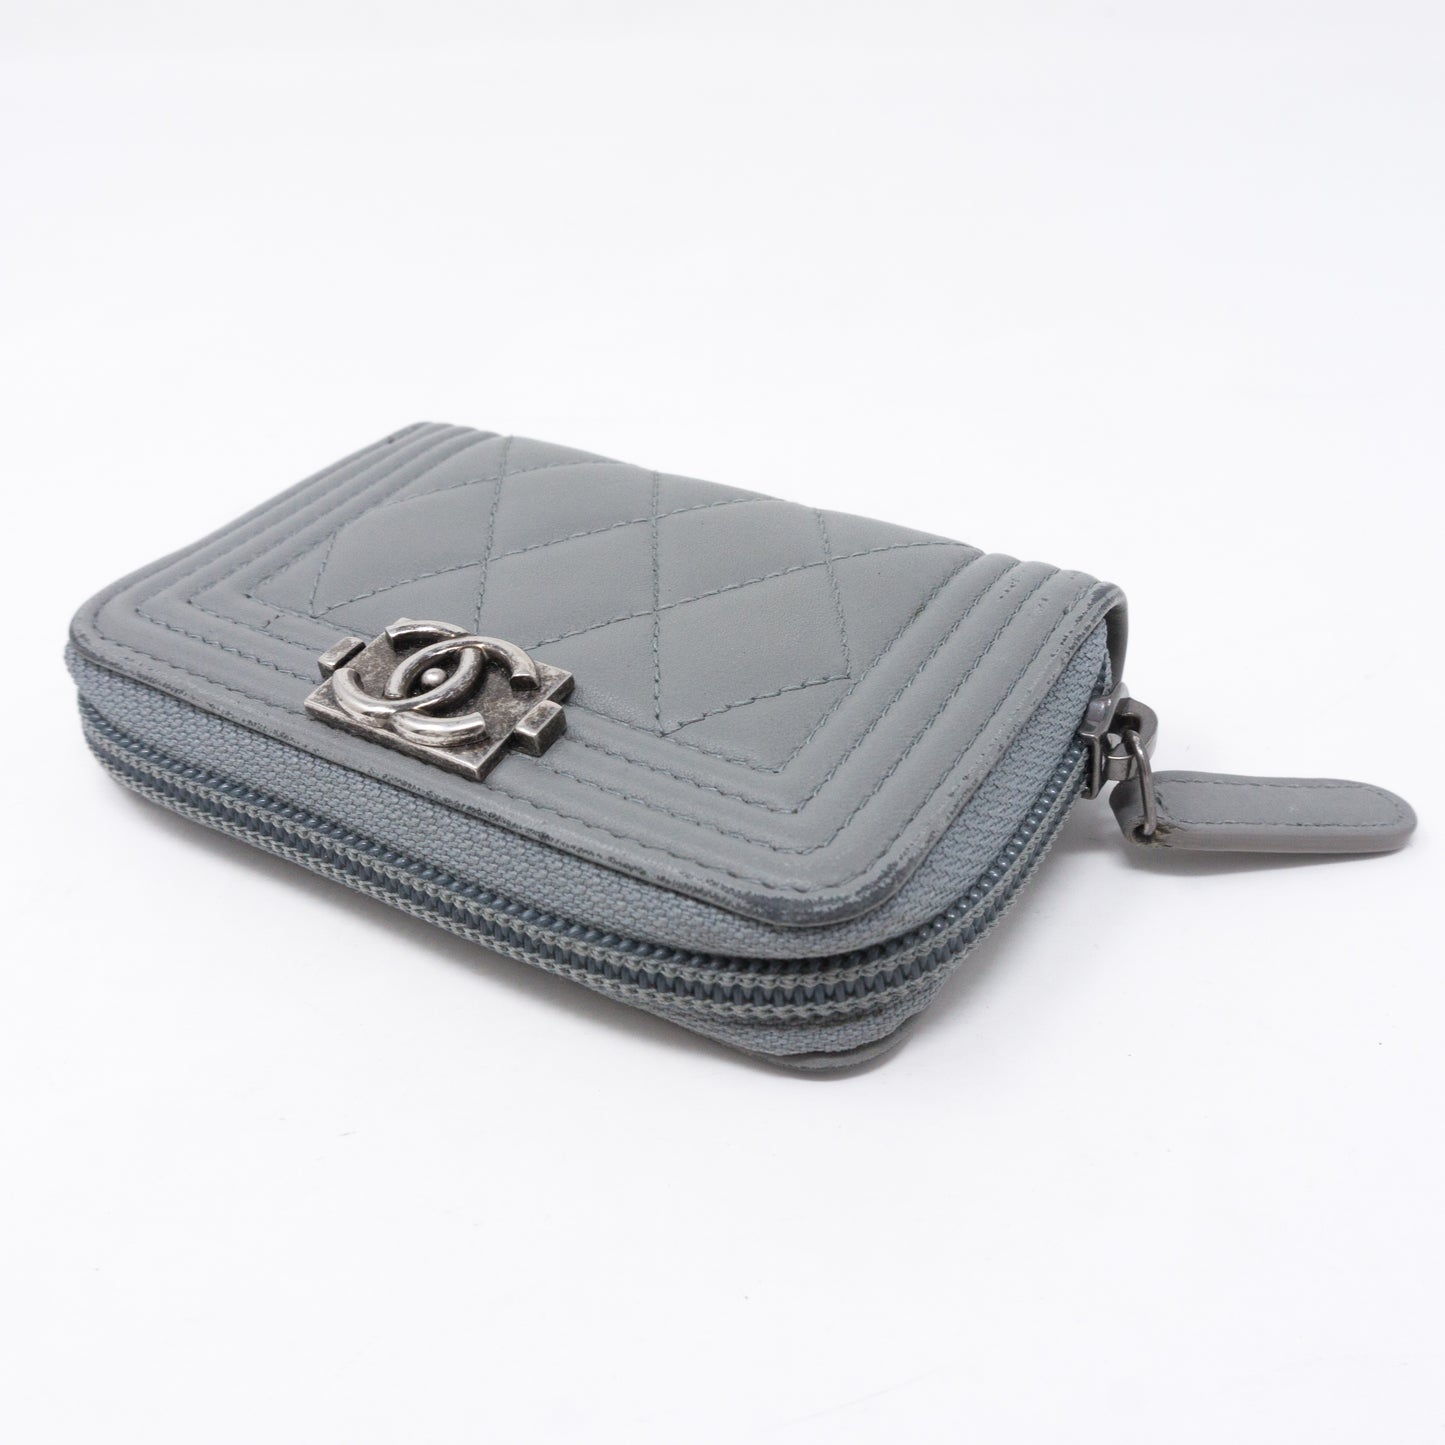 Boy Zipped Coin Purse Gray Leather